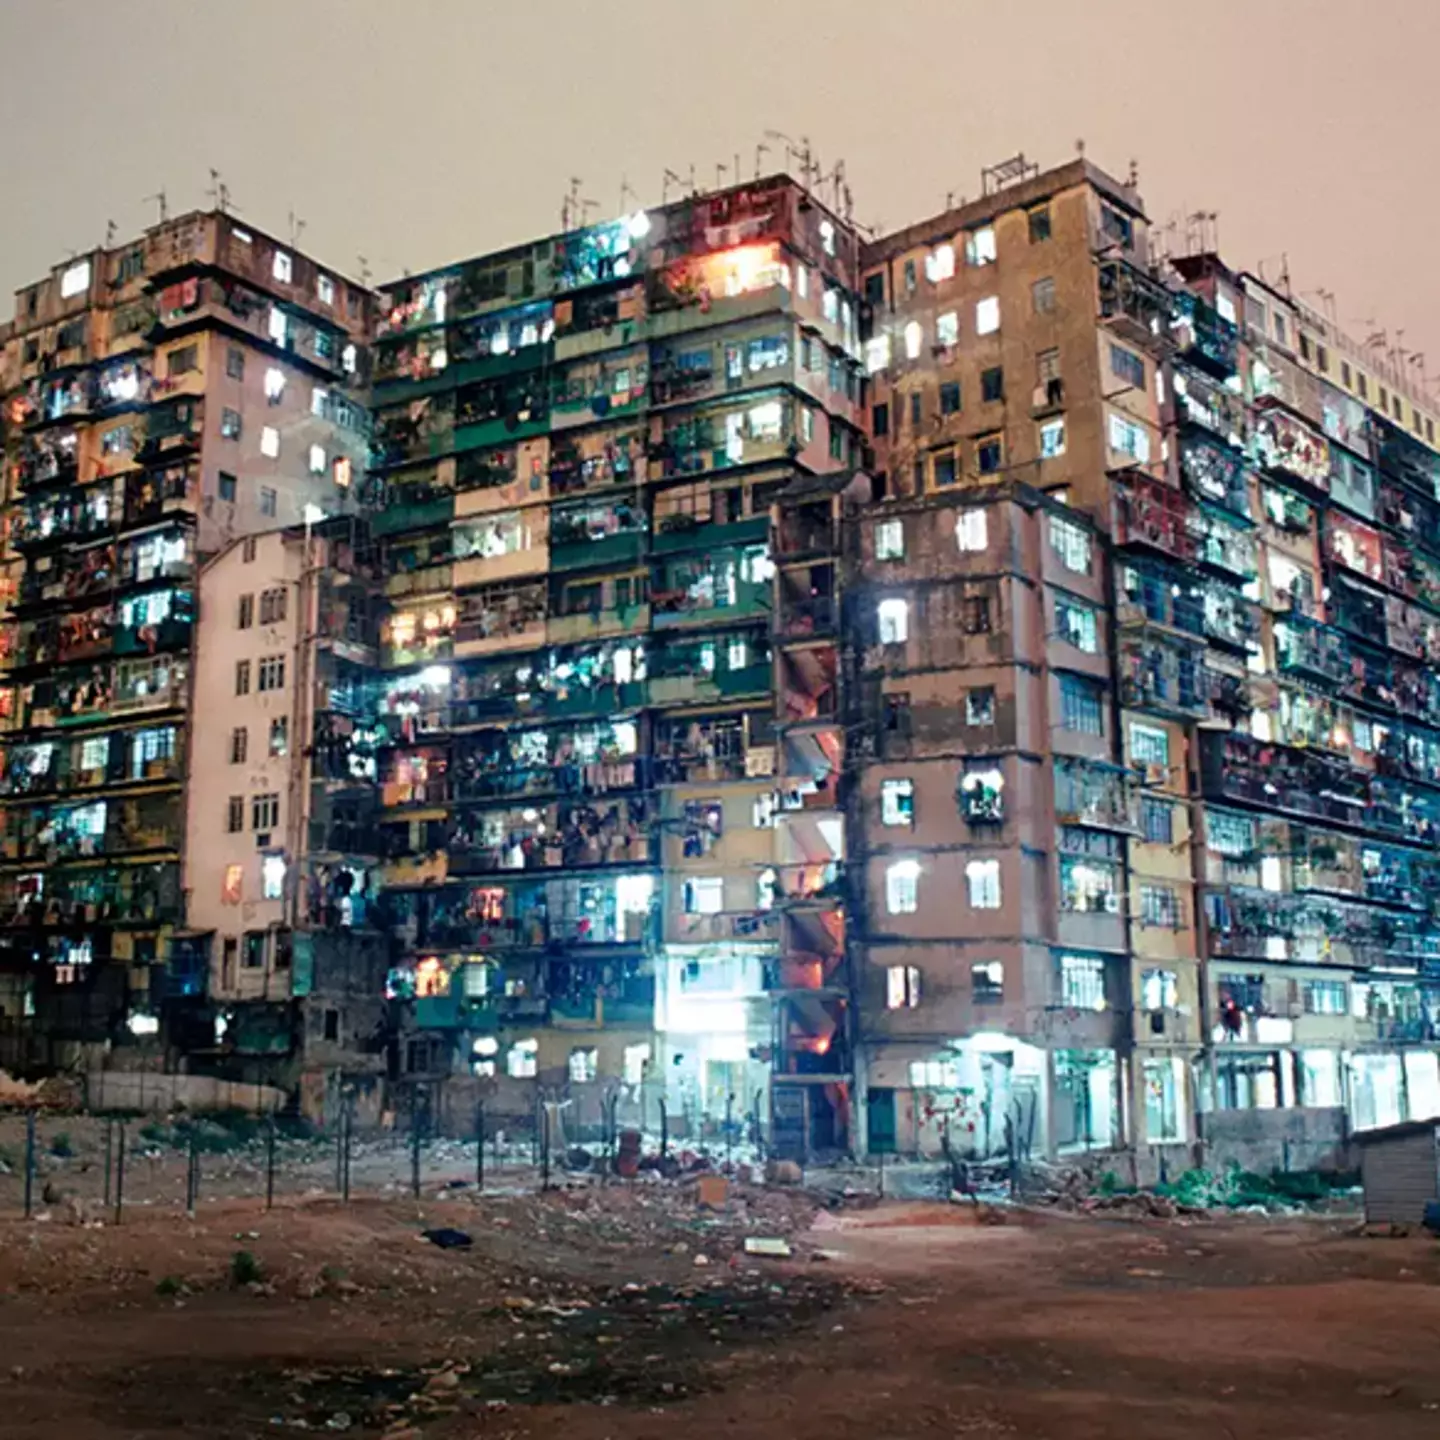 Inside dystopian town of the most crowded city on Earth that’s straight out of Blade Runner